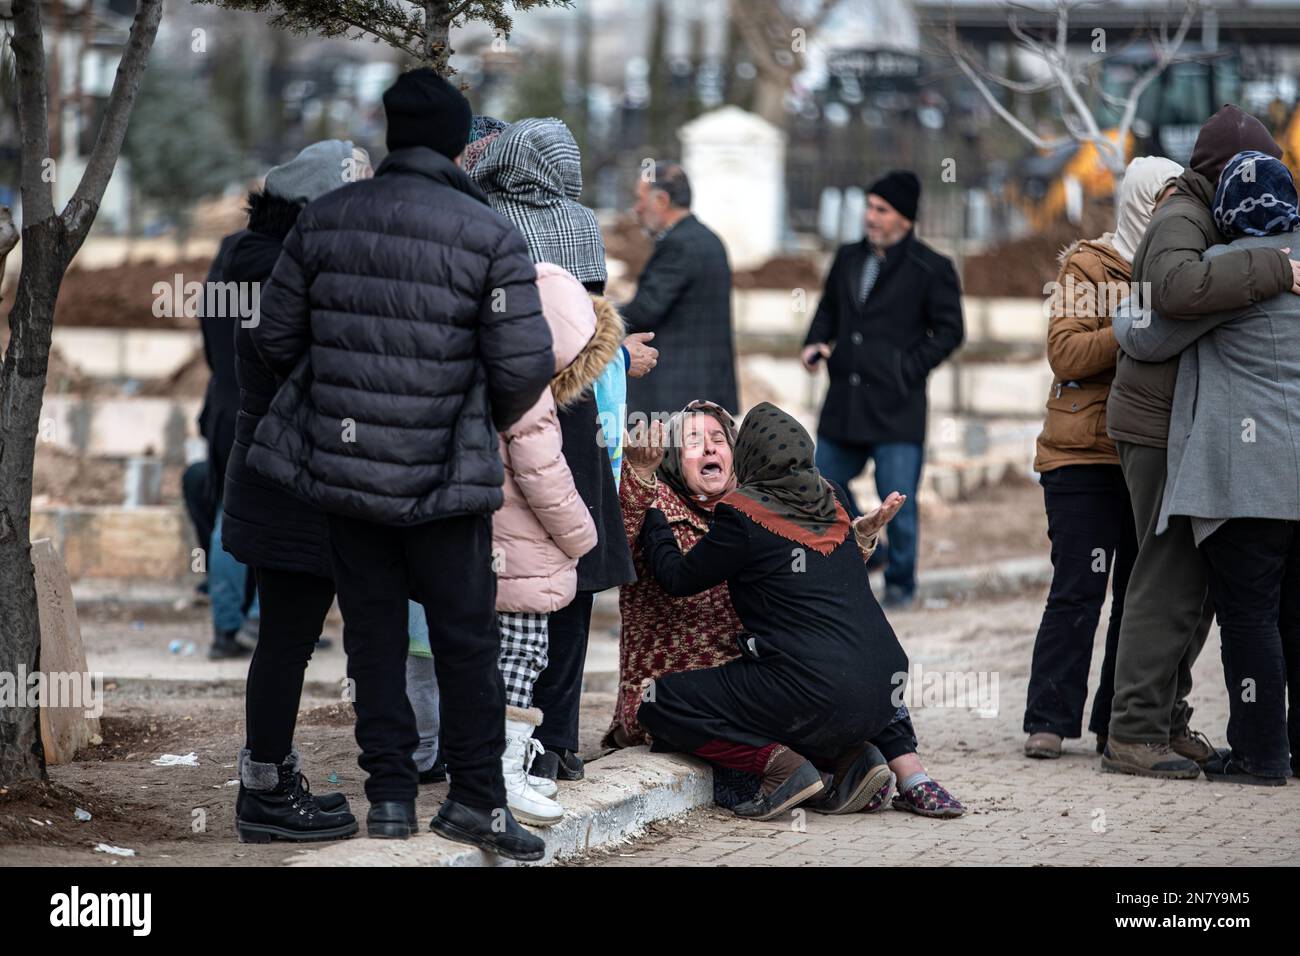 Adiyaman, Turkey. 10th Feb, 2023. People mourn the death of their relatives following an earthquake. Monday morning, a strong 7.7 magnitude, centered in the Pazarcik district, jolted Kahramanmaras and strongly shook several provinces, including Gaziantep, Sanliurfa, Diyarbakir, Adana, Adiyaman, Malatya, Osmaniye, Hatay, and Kilis. Later, at 13.24 p.m. (1024GMT), a 7.6 magnitude quake centered in Kahramanmaras' Elbistan district struck the region. Turkiye declared 7 days of national mourning after deadly earthquakes in southern provinces. Credit: SOPA Images Limited/Alamy Live News Stock Photo